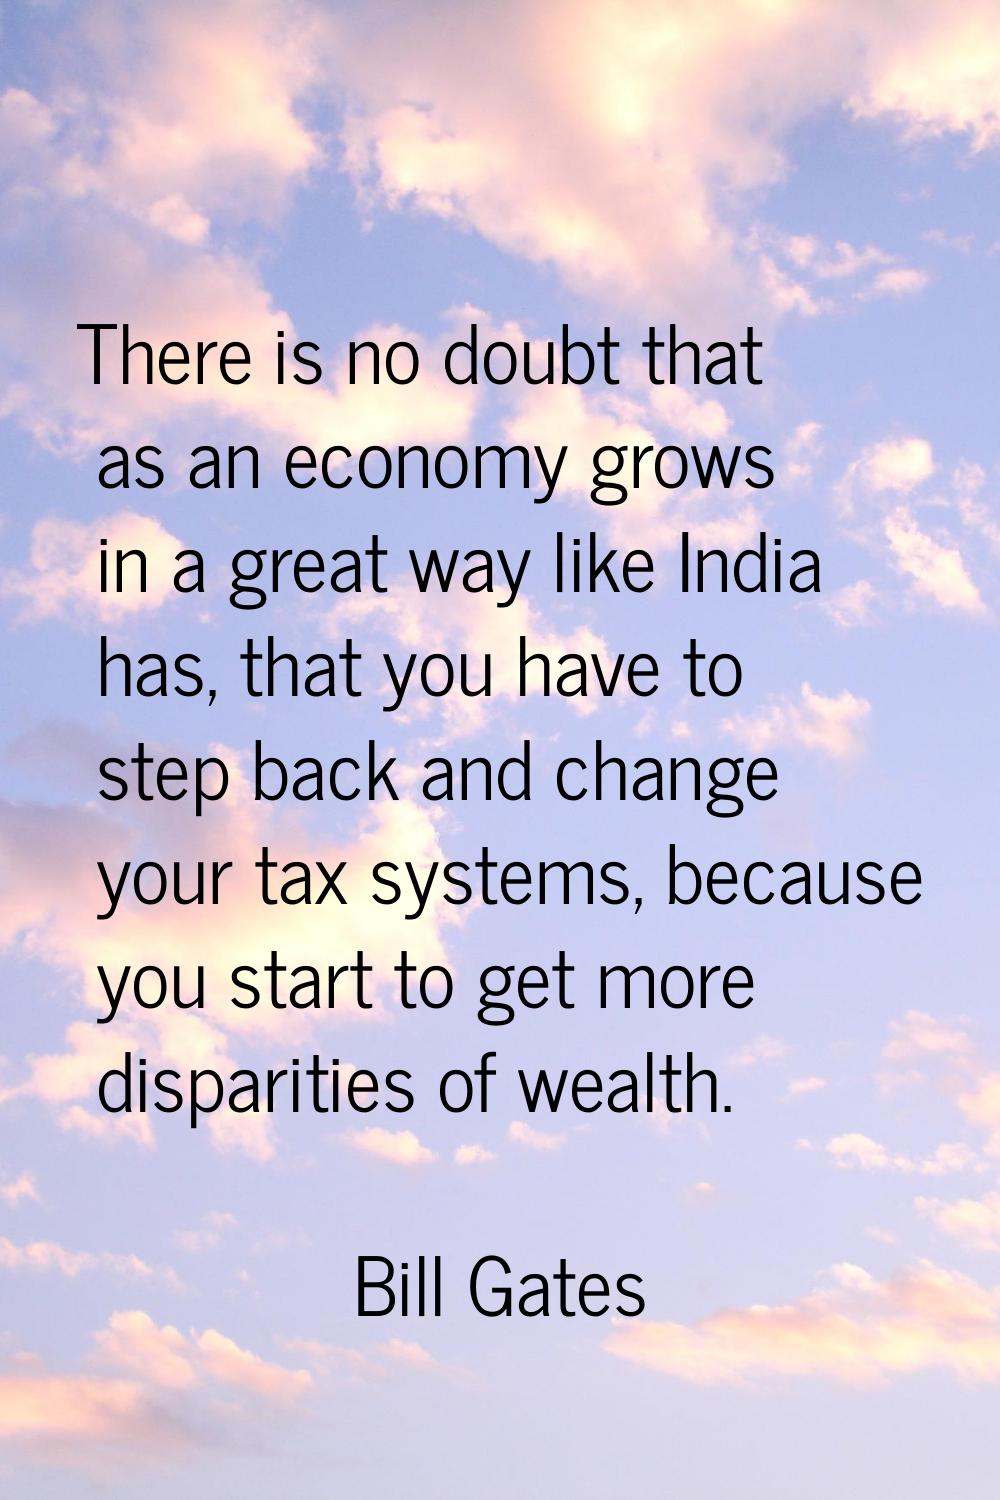 There is no doubt that as an economy grows in a great way like India has, that you have to step bac